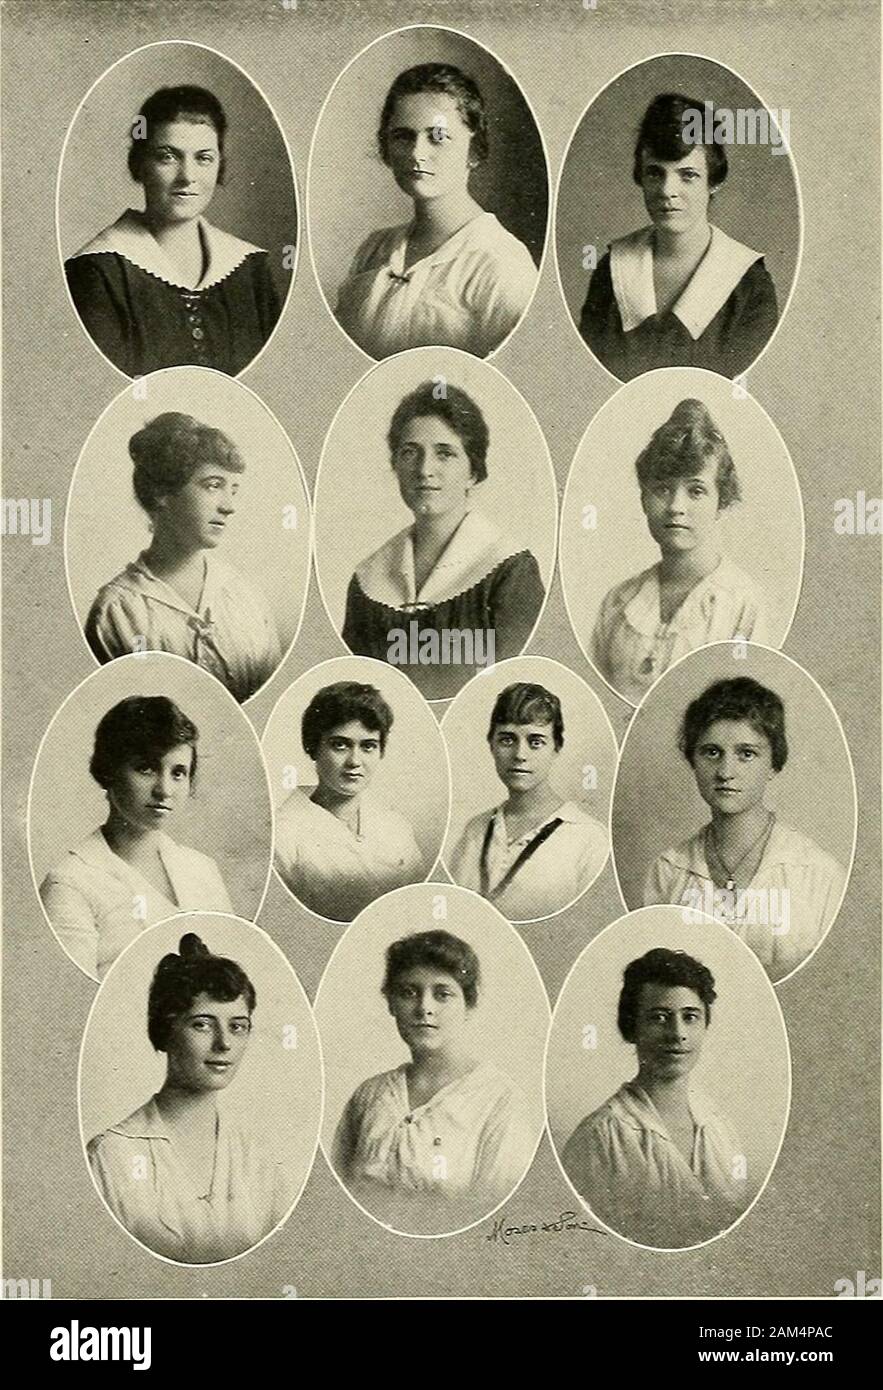 Jambalaya [yearbook] 1917 . Alpha Omicron Pi Founded 189/ Pi Chapter of Alpha Omicron Pi Established 1898 In Faculty Sue Katherine GilleanDagmar Renshaw Le Breton AcTiE Members Fav Morgan, 20 RiETTA Garland. 17Jean Hill, 17 Lessie Madison, 17 Kathleen ONiell, 17 Mary Raymond, 17 Mildred Renshaw, 17Ma^y Sumner, 17 Macda Charlaron, 18 Helen Gravemberc, 19 Anna McLellan, 19 Evelyn Picott, 19 (183) Ji/^MBJTL-^yC^. First Roto—Ross, Vv ALMiLEV, McLeanSecond Rom—WoGAN, Bourgeois, SextonThird Rom—RiGHTOR, RuGAN, Slagle. K. AyresFourth Rom—Parsons, Wallace, M. Ayres (184) tot/ Chi Omega Founded April Stock Photo